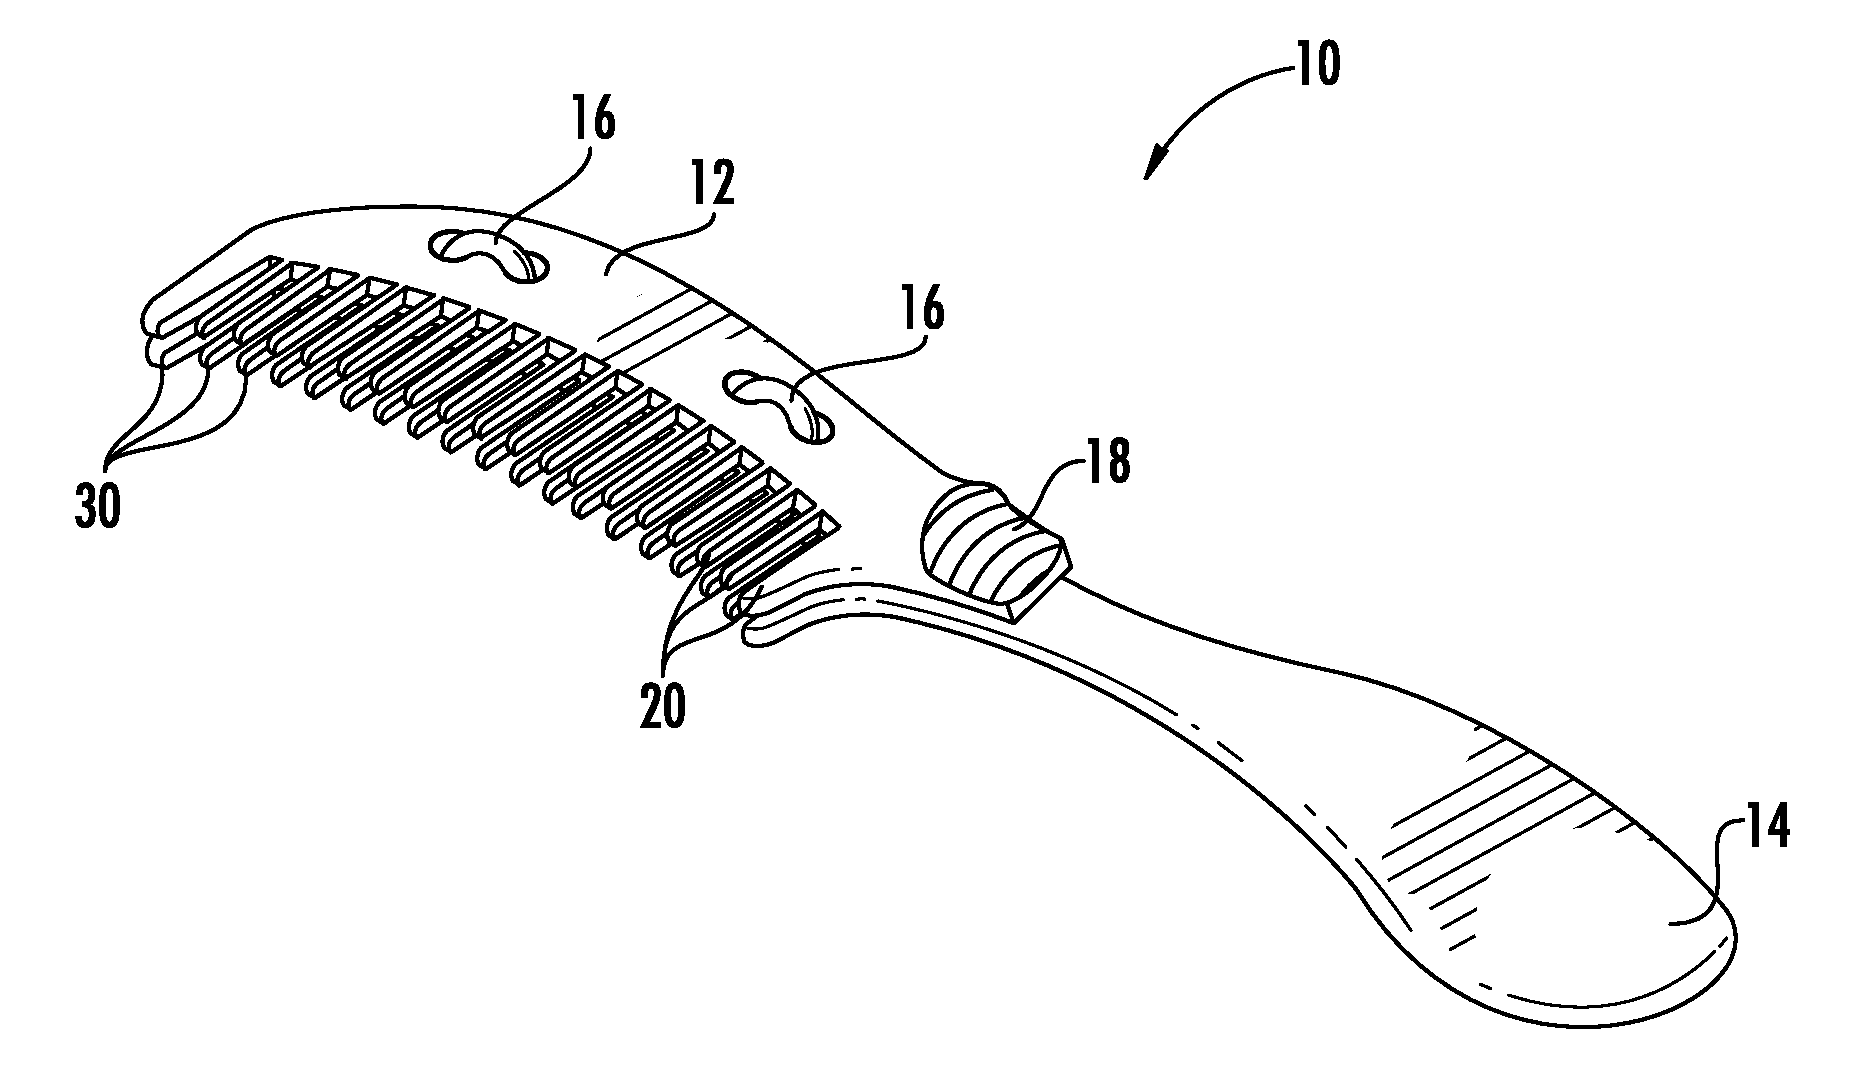 Systems and methods for combing, drying, and straightening hair